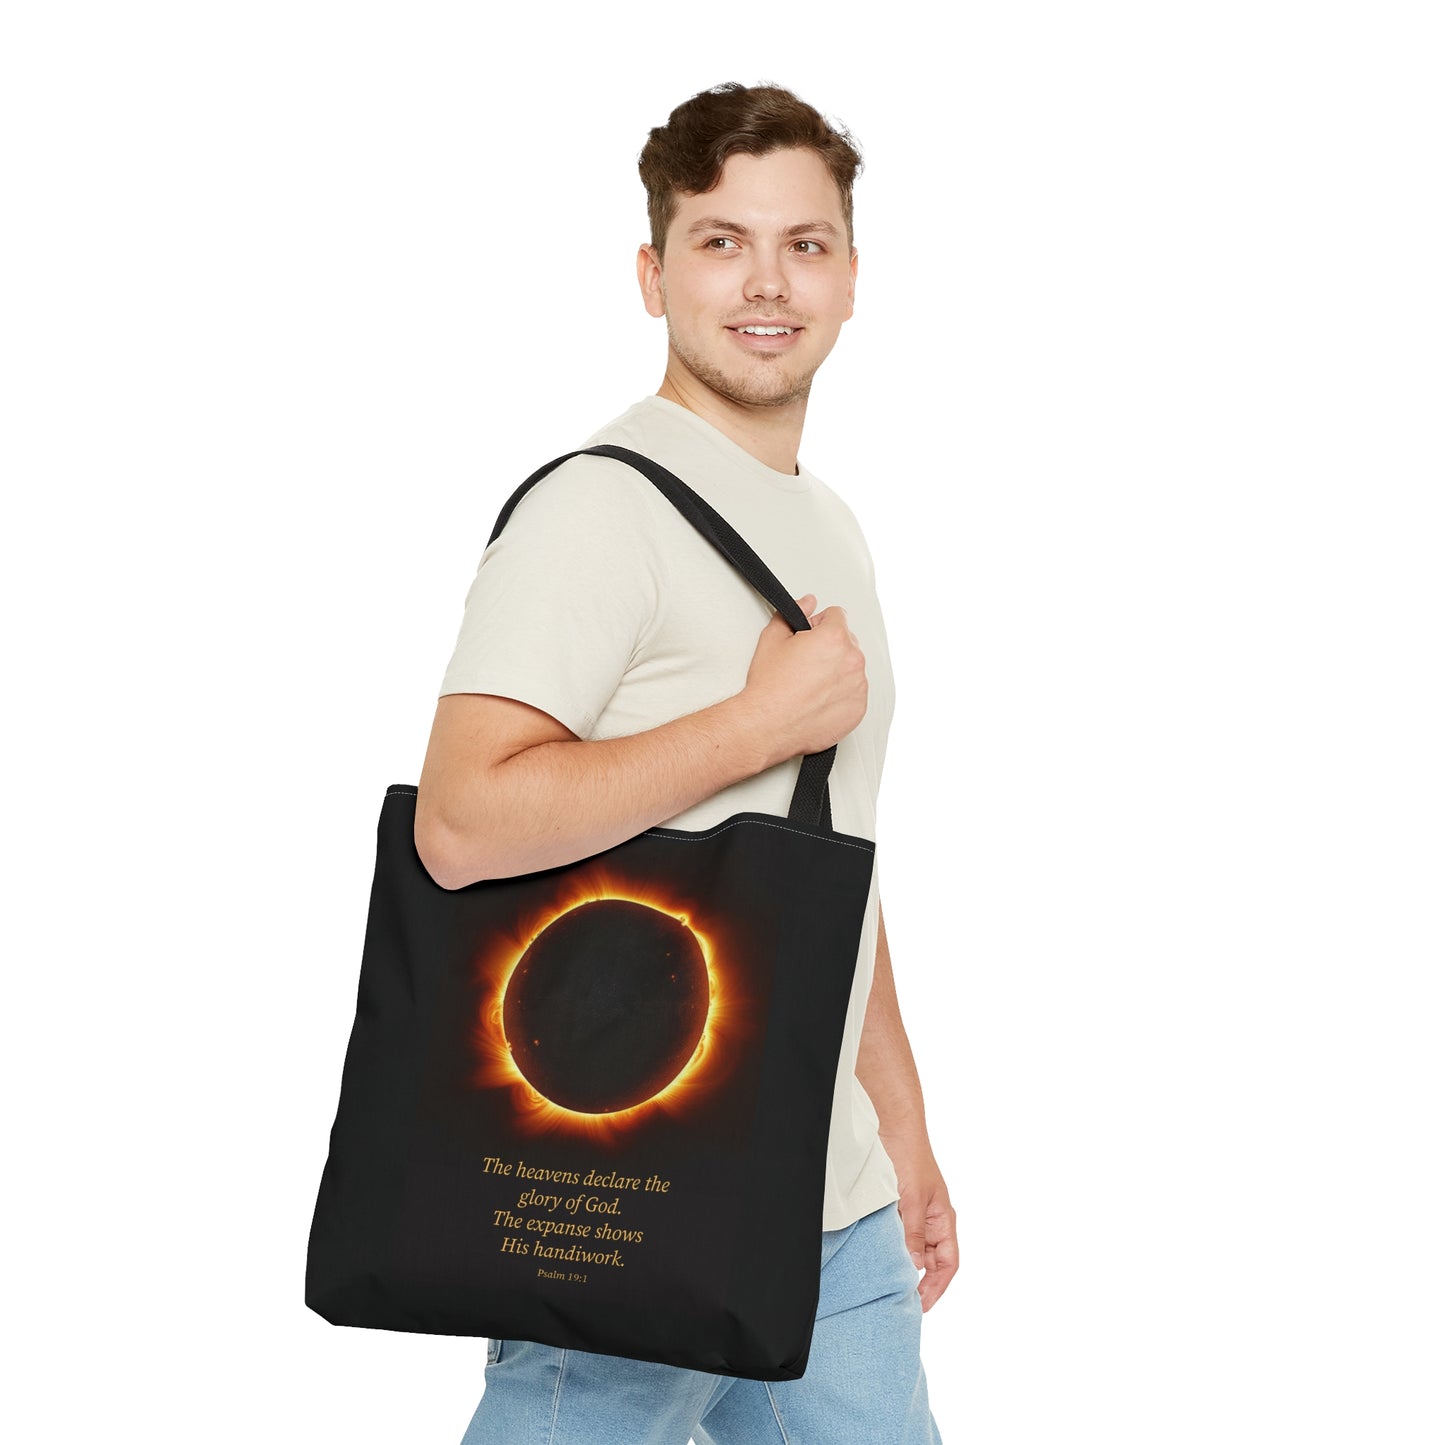 Tote Bag - The Heavens Declare the Glory of God